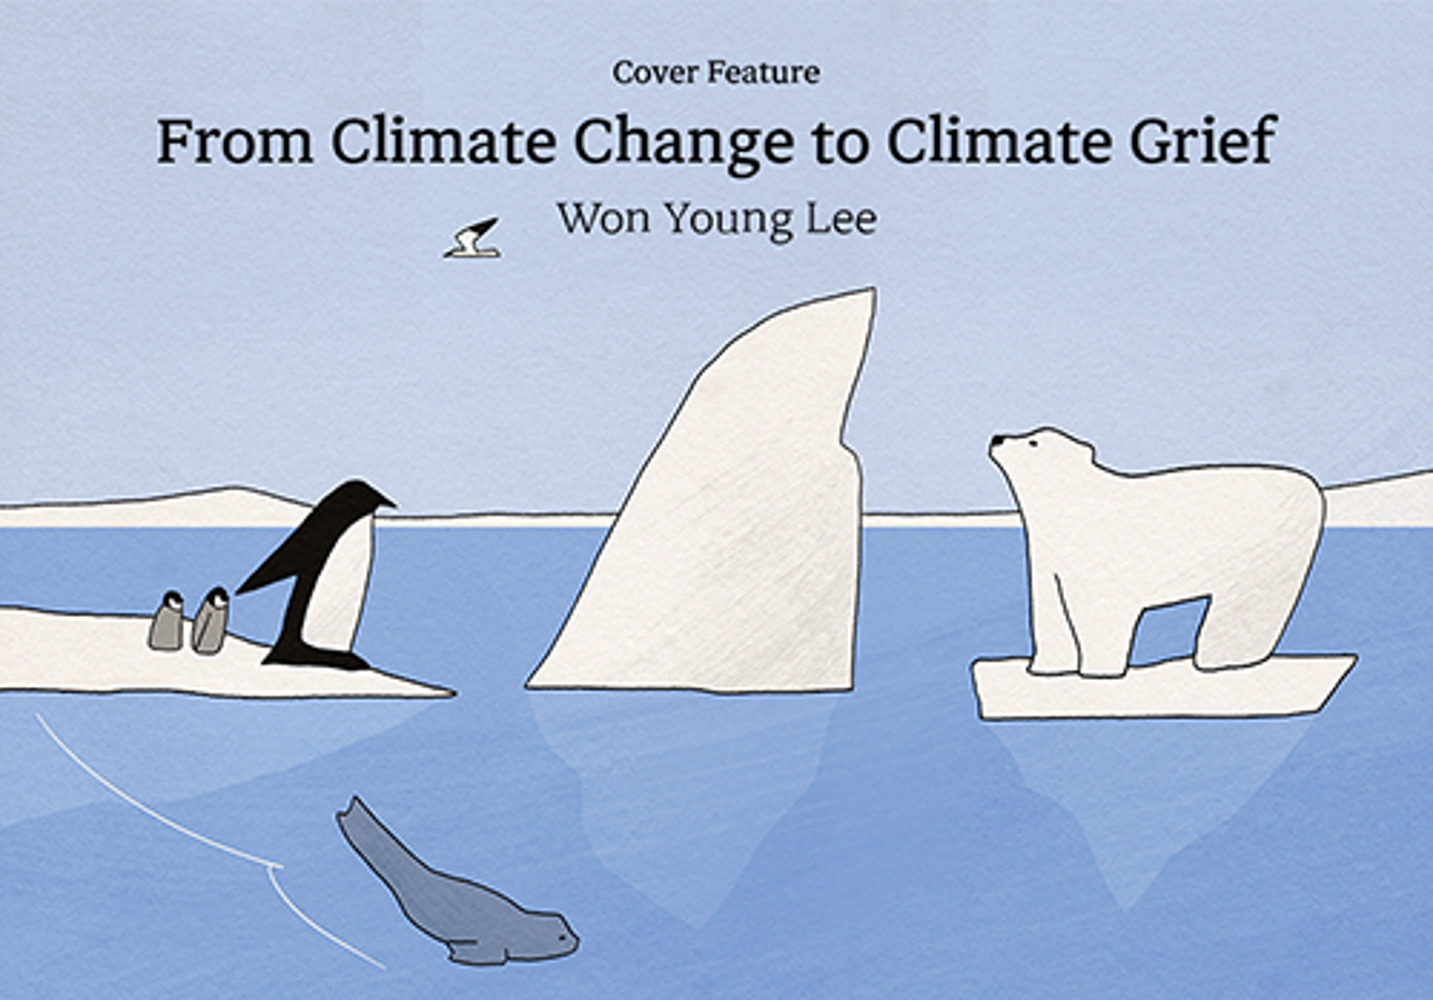 [Cover Feature] From Climate Change to Climate Grief